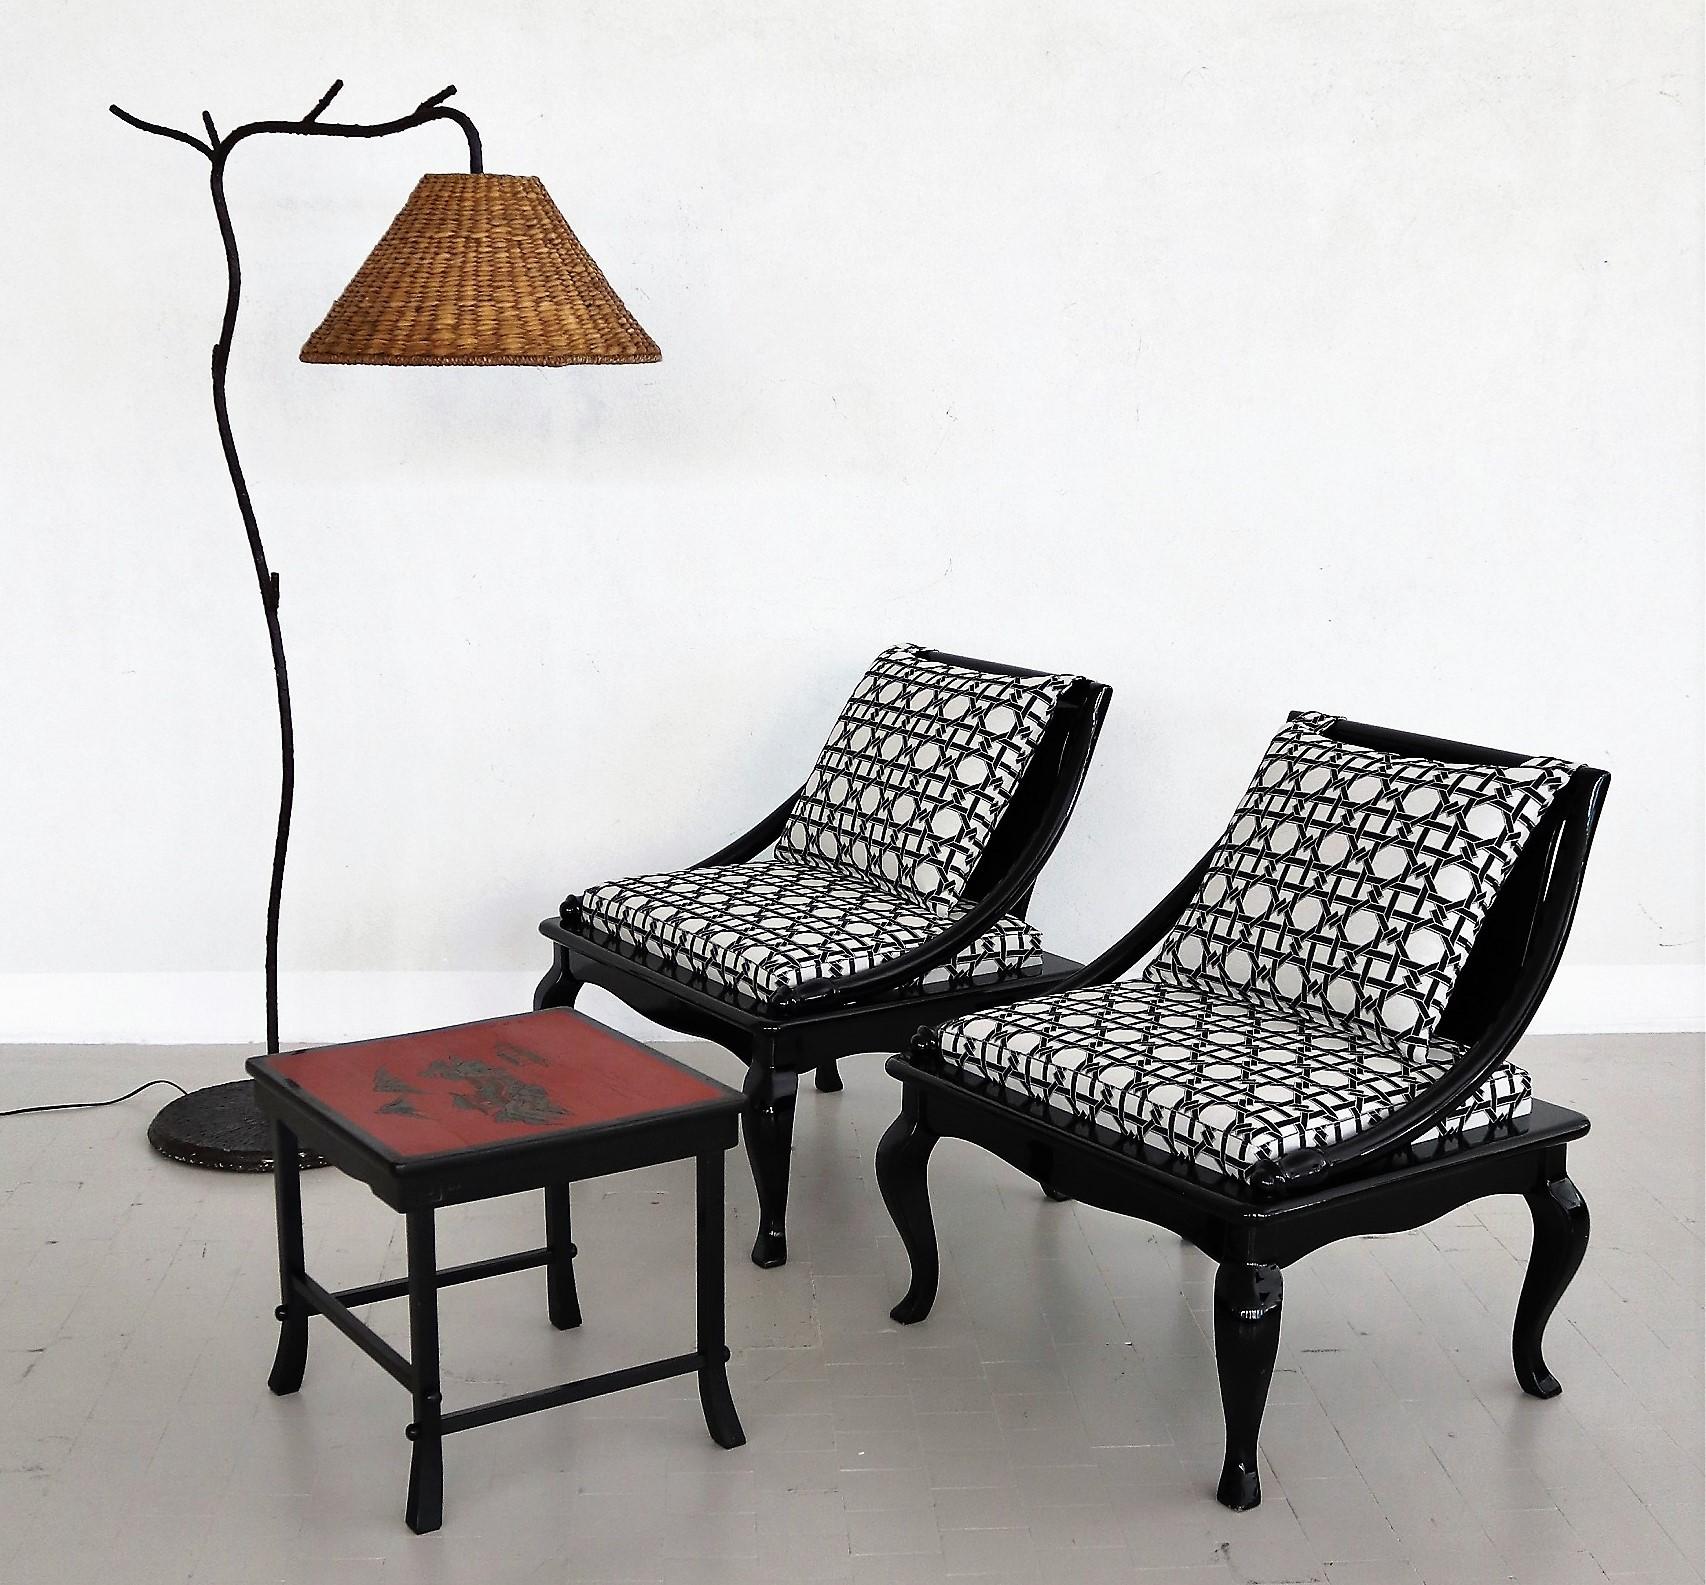 Midcentury Asian Side Chairs in Black Lacquer Wood and New Upholstery, 1970s For Sale 5